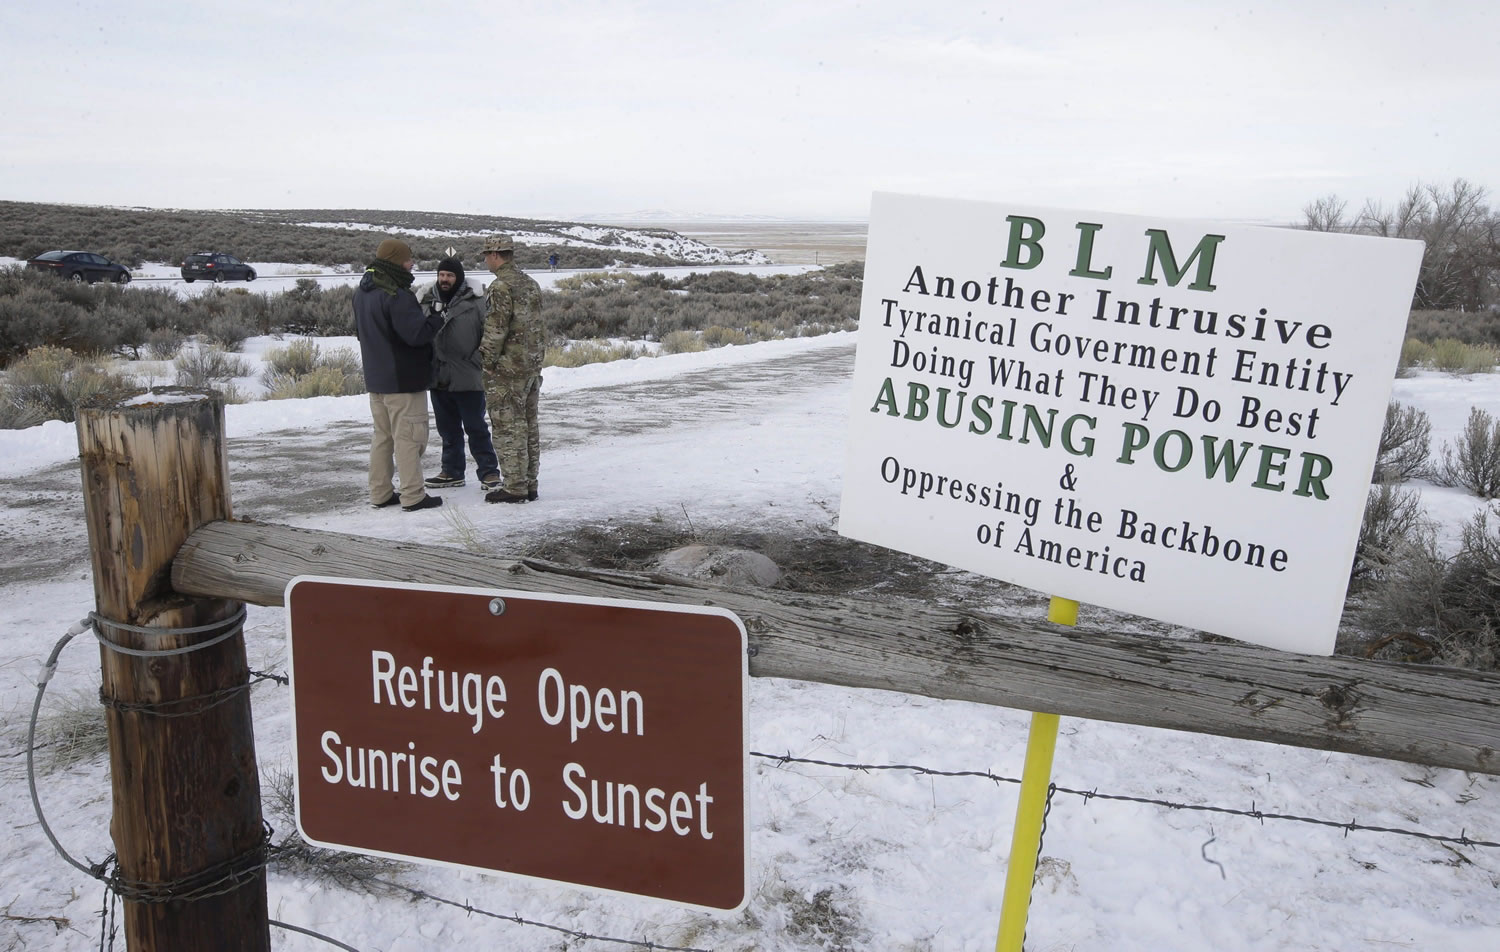 Members of the group occupying the Malheur National Wildlife Refuge headquarters stand guard Jan. 4, near Burns, Ore. Thousands of archeological artifacts and maps detailing where more can be found are stored at a national wildlife refuge currently being held by a group of armed protestors.